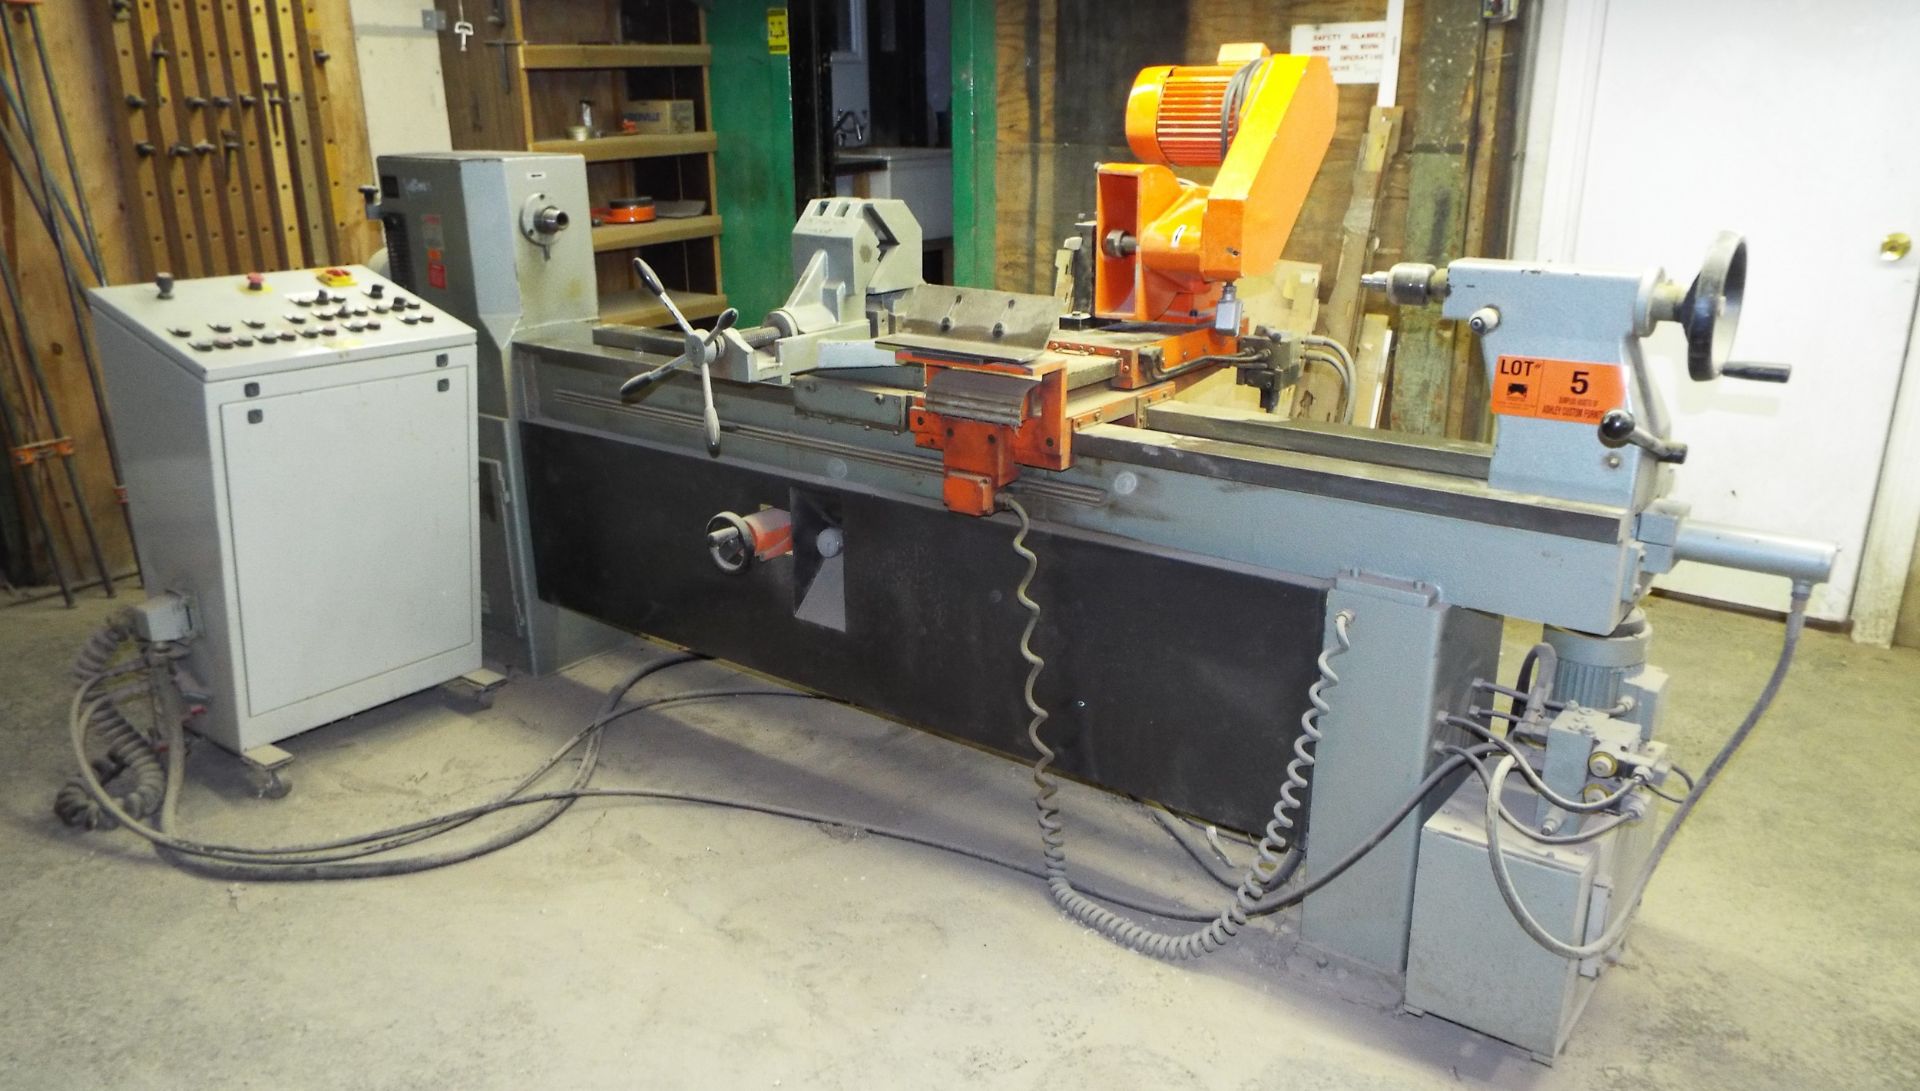 HAPFCO ALBUS AP-8000-HF 496.1 AUTOMATIC TRACER WOOD TURNING LATHE WITH 3 HP SPINDLE DRIVE, 21" - Image 2 of 6